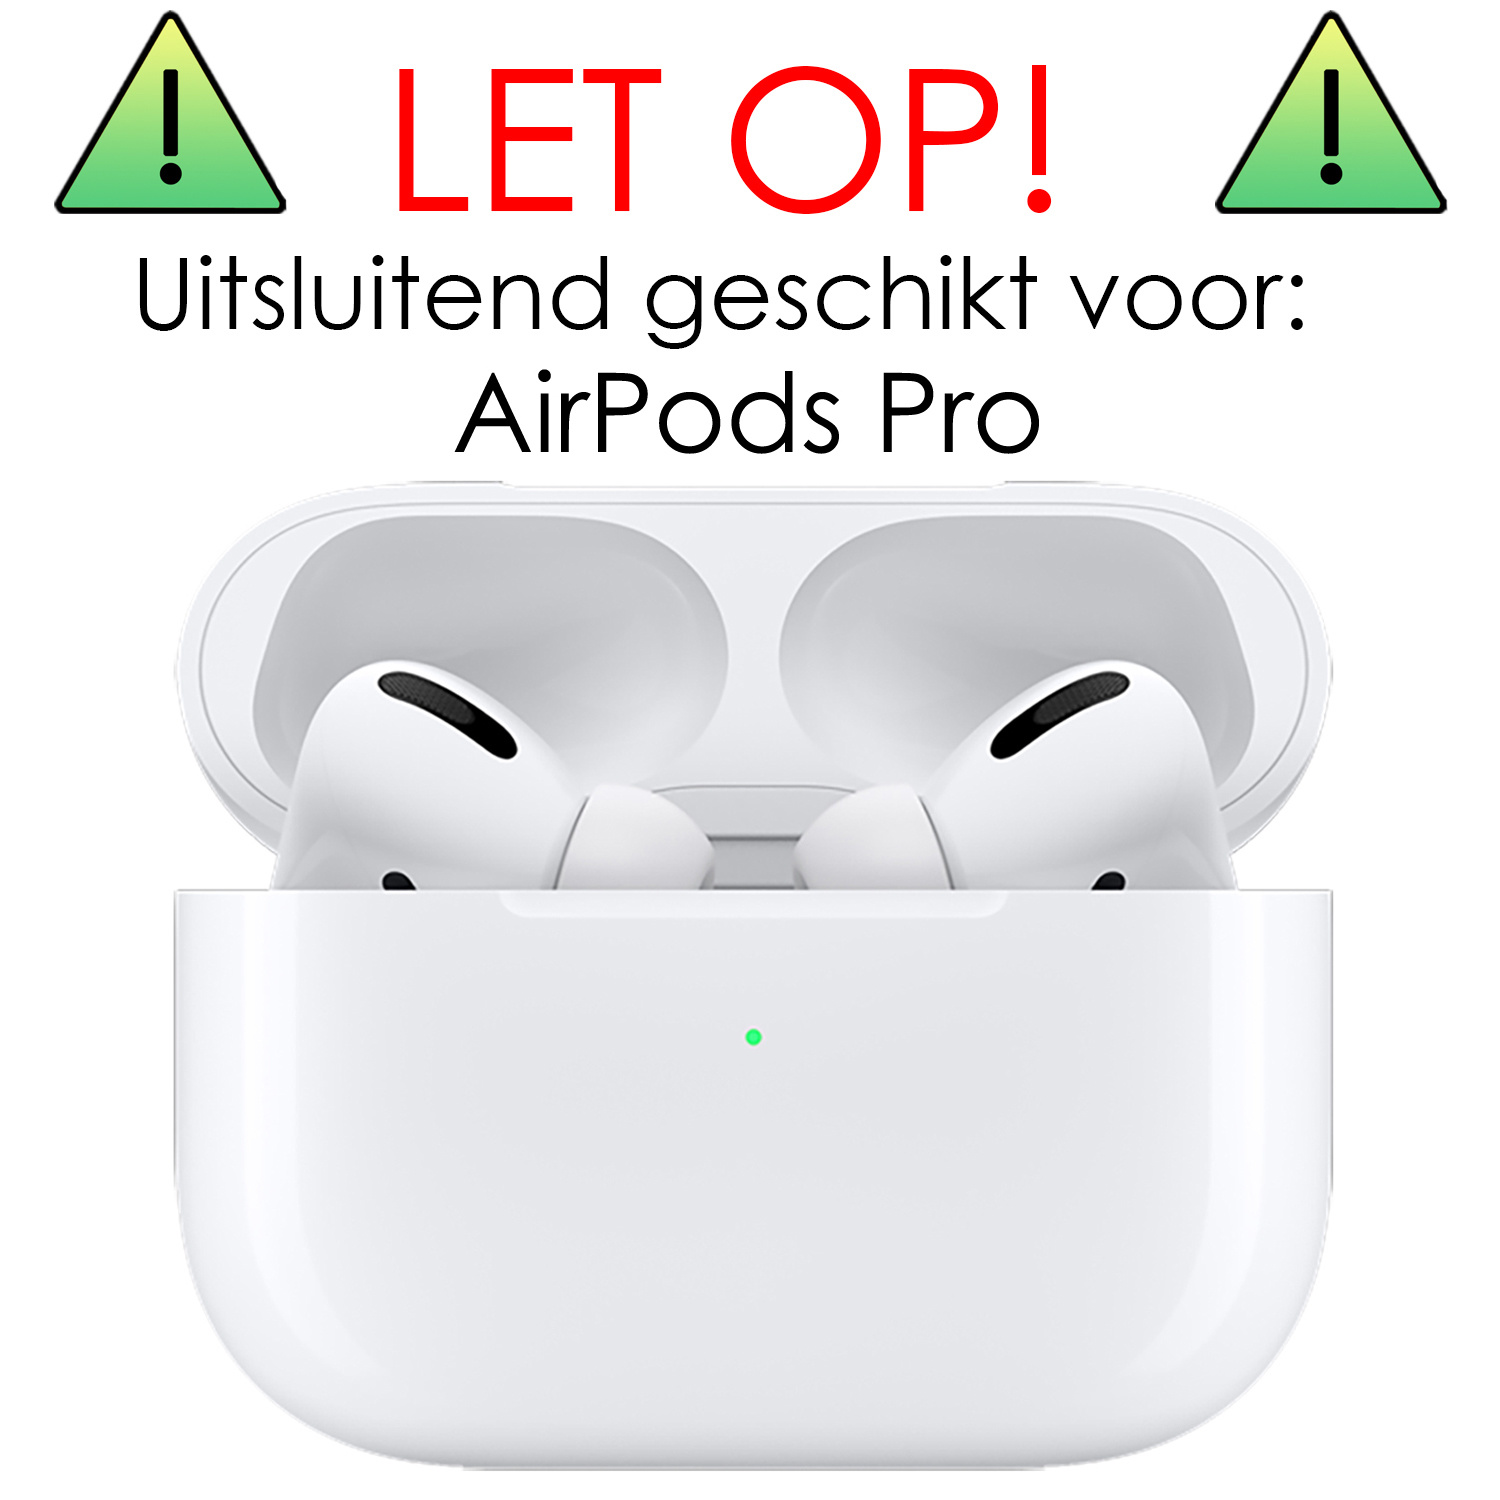 NoXx Hoes Geschikt voor Airpods Pro Hoesje Cover Silicone Case Hoes - Rood